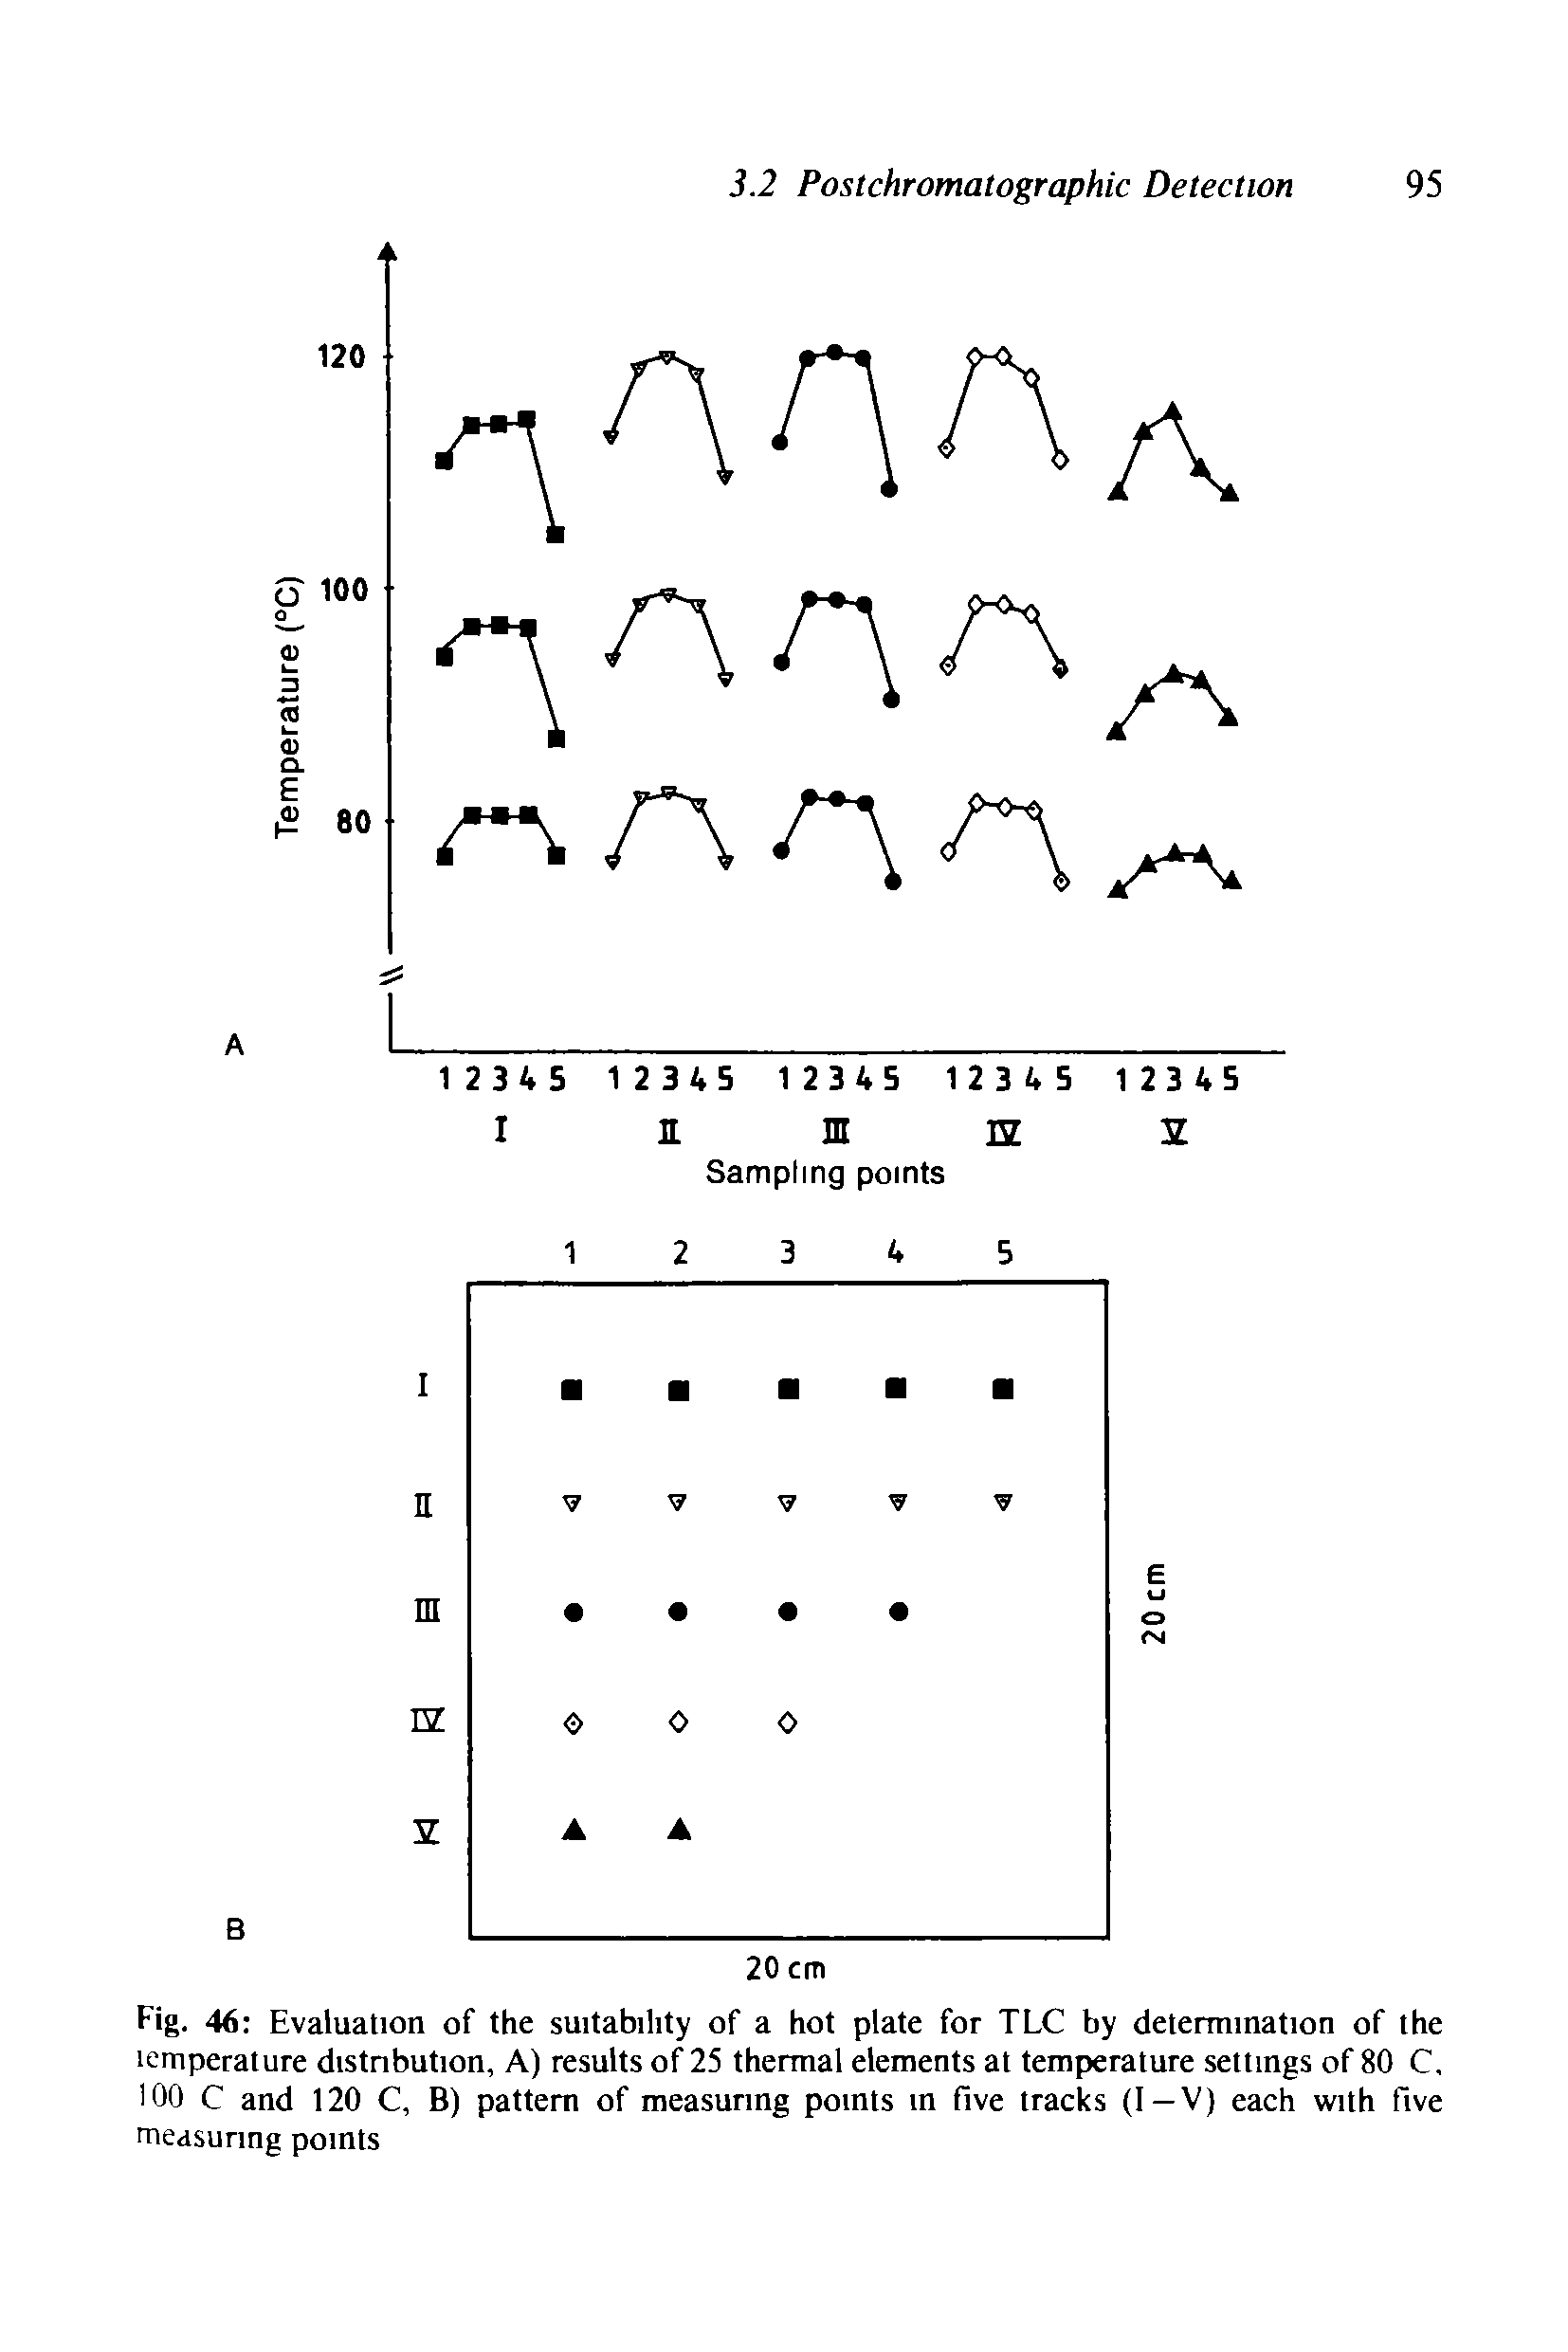 Fig. 46 Evaluation of the suitability of a hot plate for TLC by determination of the lemperature distribution. A) results of 25 thermal elements at temperature settings of 80 C, 100 C and 120 C, B) pattern of measuring points in five tracks (I—V) each with five measuring points...